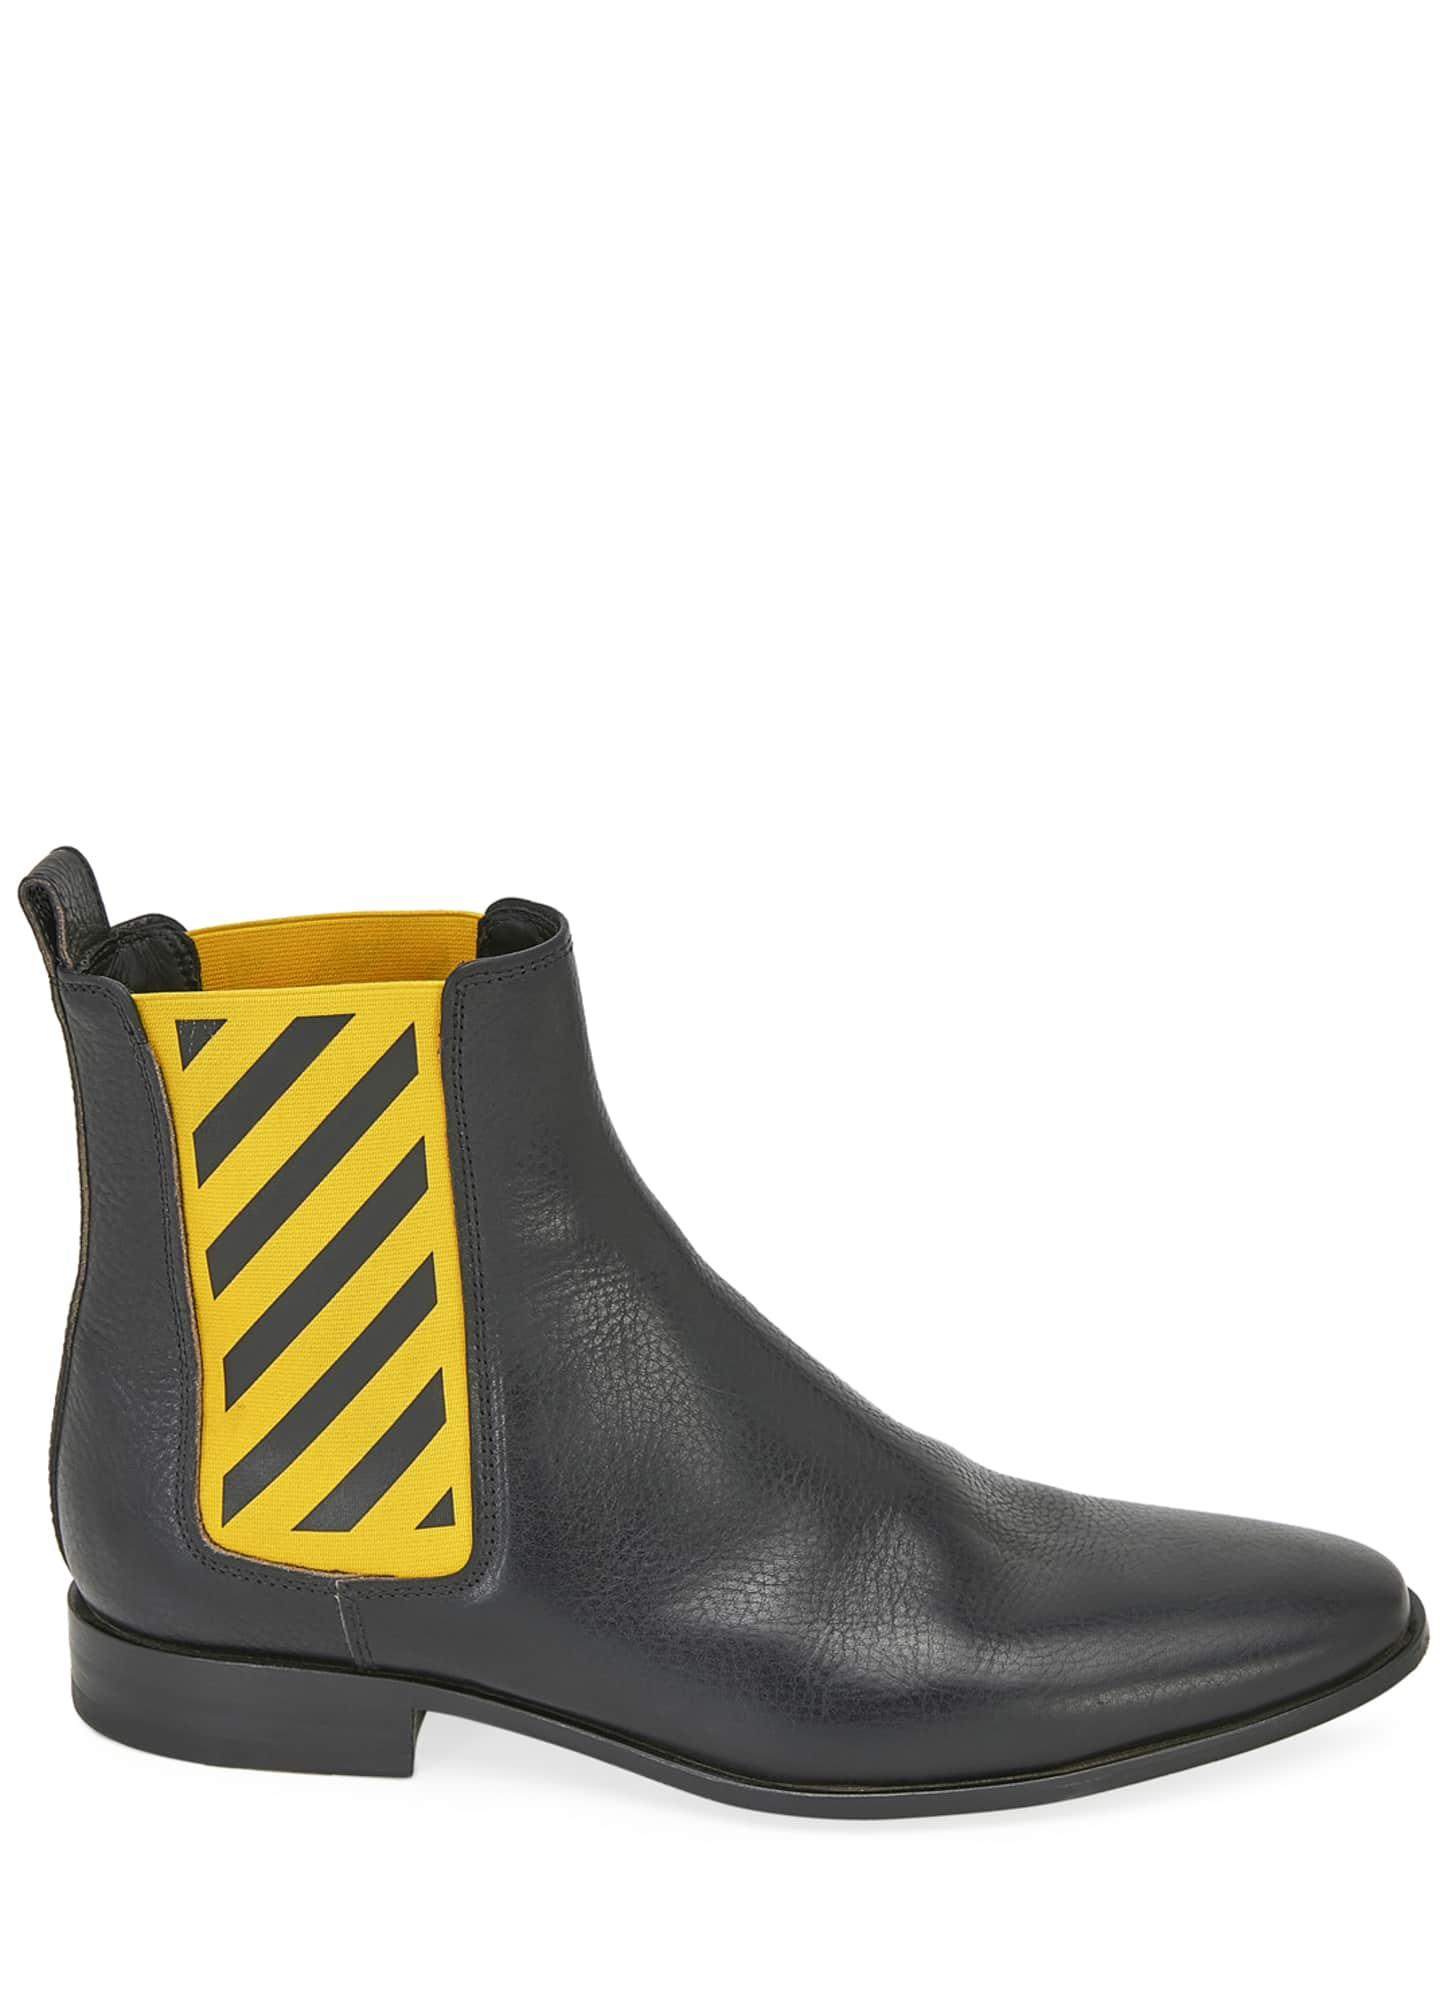 Leather Black And Yellow Chelsea Boots 